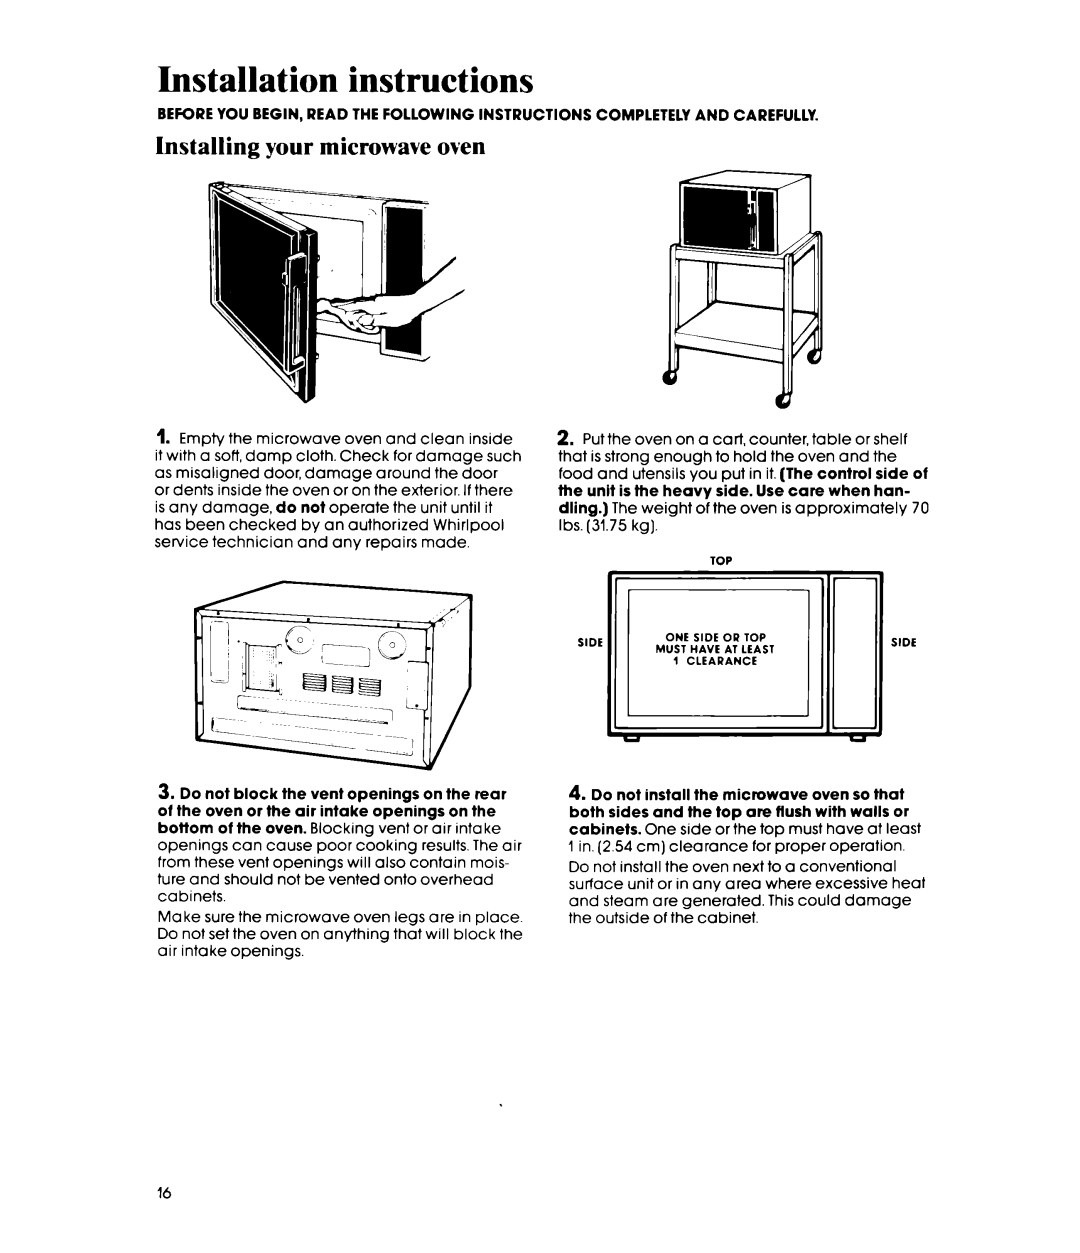 Whirlpool MW8500XP manual Installation instructions, Installing your microwave oven 